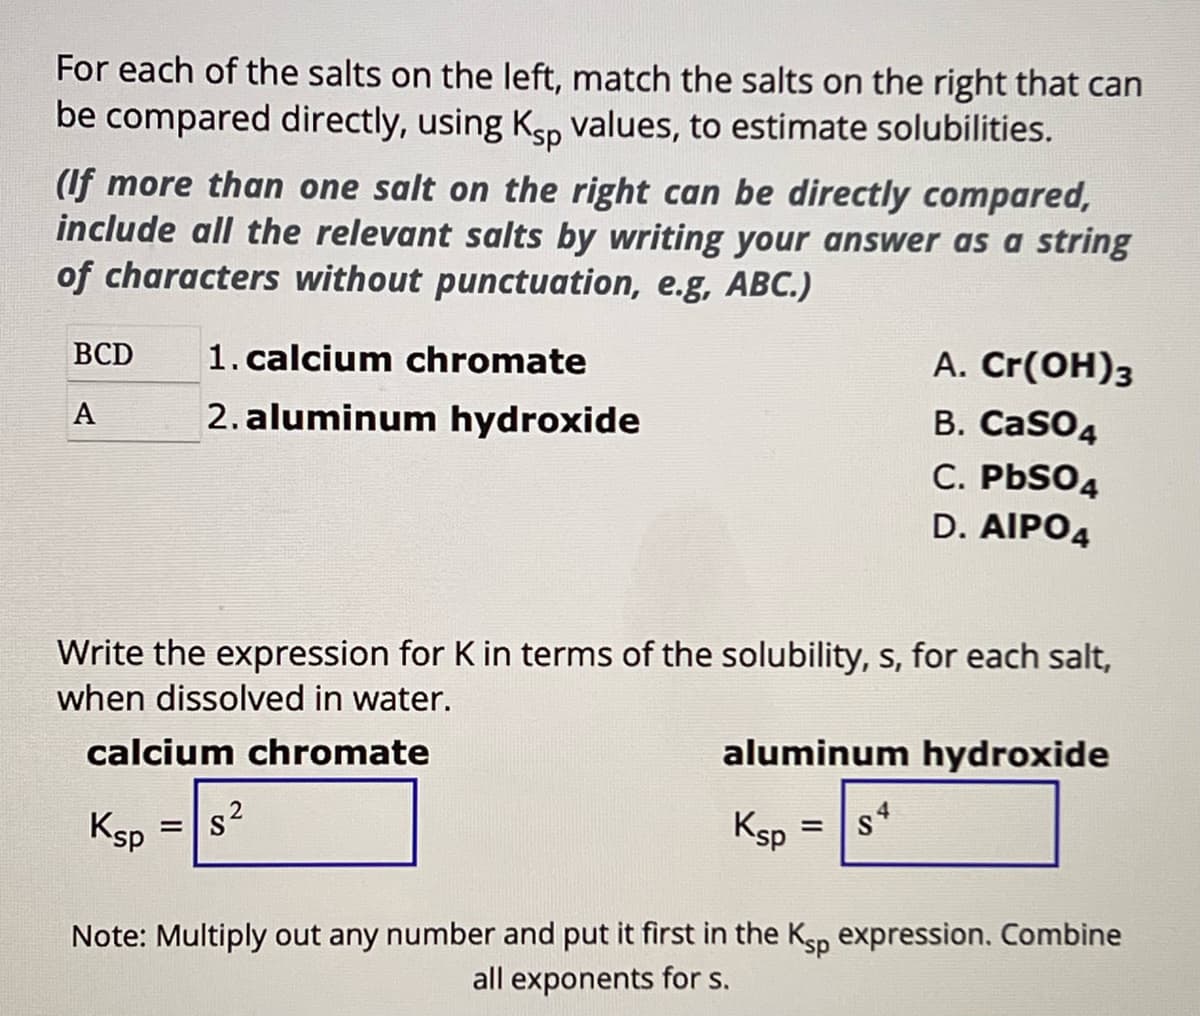 For each of the salts on the left, match the salts on the right that can
be compared directly, using Ksp values, to estimate solubilities.
(If more than one salt on the right can be directly compared,
include all the relevant salts by writing your answer as a string
of characters without punctuation, e.g, ABC.)
BCD
1. calcium chromate
A
2. aluminum hydroxide
A. Cr(OH)3
B. CaSO4
C. PbS04
D. AIPO4
Write the expression for K in terms of the solubility, s, for each salt,
when dissolved in water.
calcium chromate
2
Ksp
=
S
aluminum hydroxide
Ksp
=
s4
Note: Multiply out any number and put it first in the Ksp expression. Combine
all exponents for s.